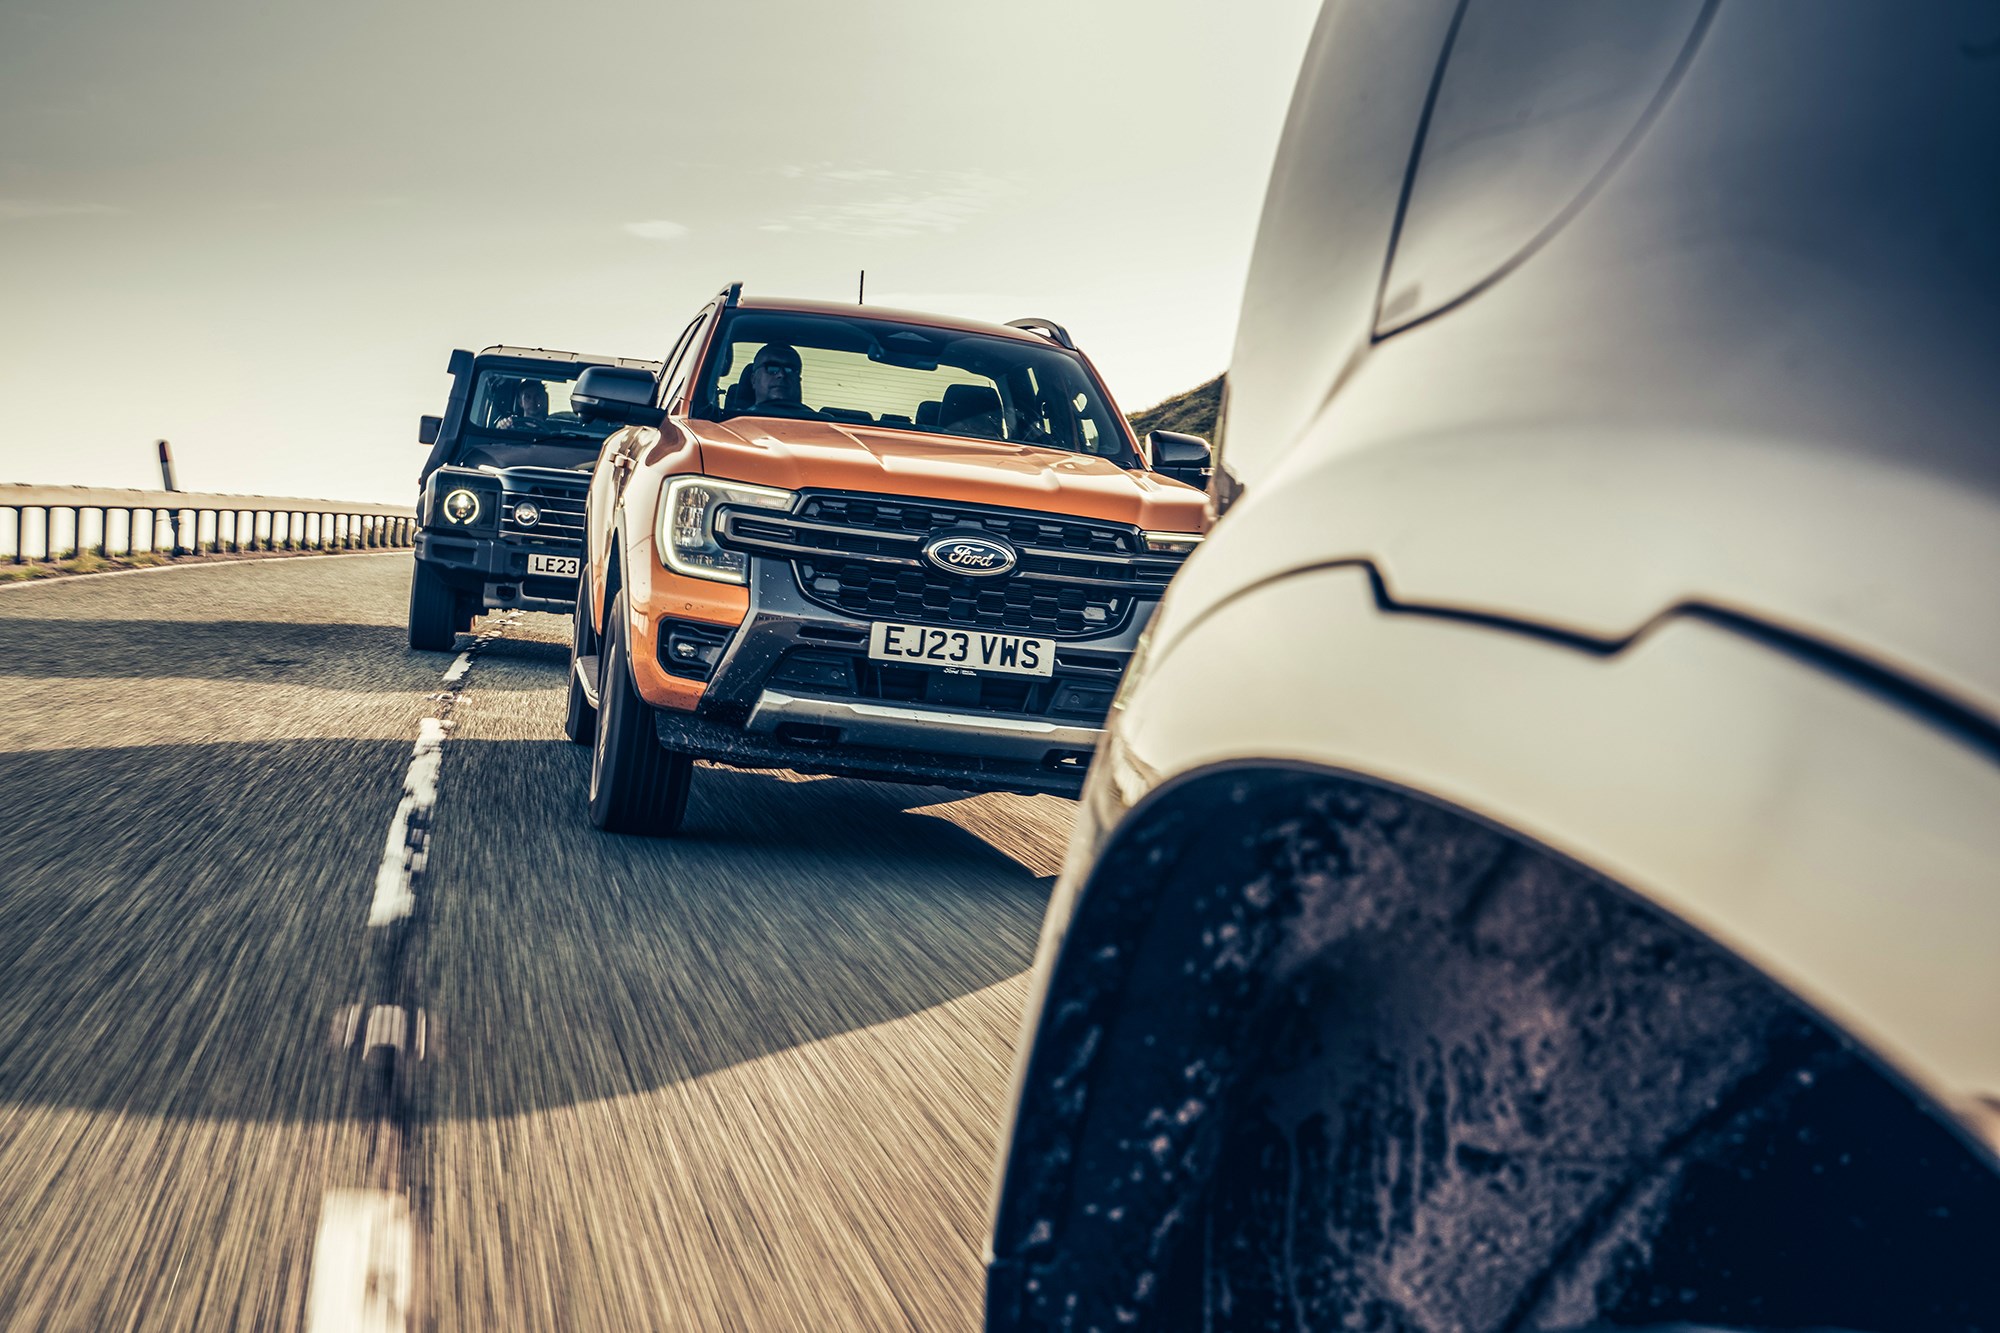 Ineos Grenadier vs Land Rover Defender vs Ford Ranger triple-test review:  Britain's toughest 4x4s tested on road – and off